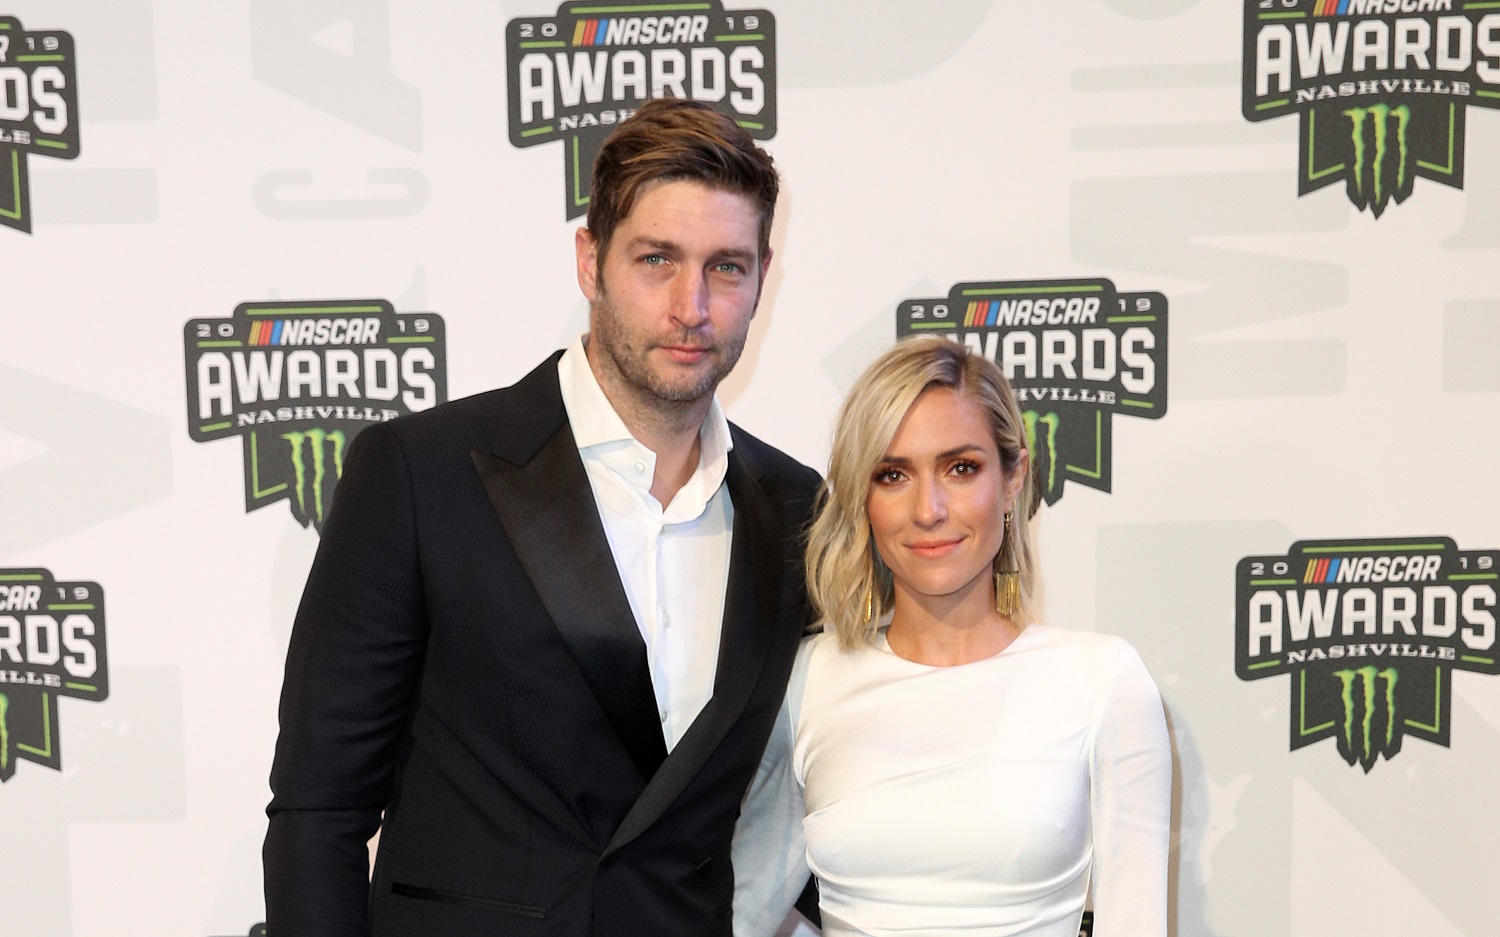 Jay Cutler and Kristin Cavallari revealed in April 2020 that they intended to divorce. | Jared C. Tilton/Getty Images